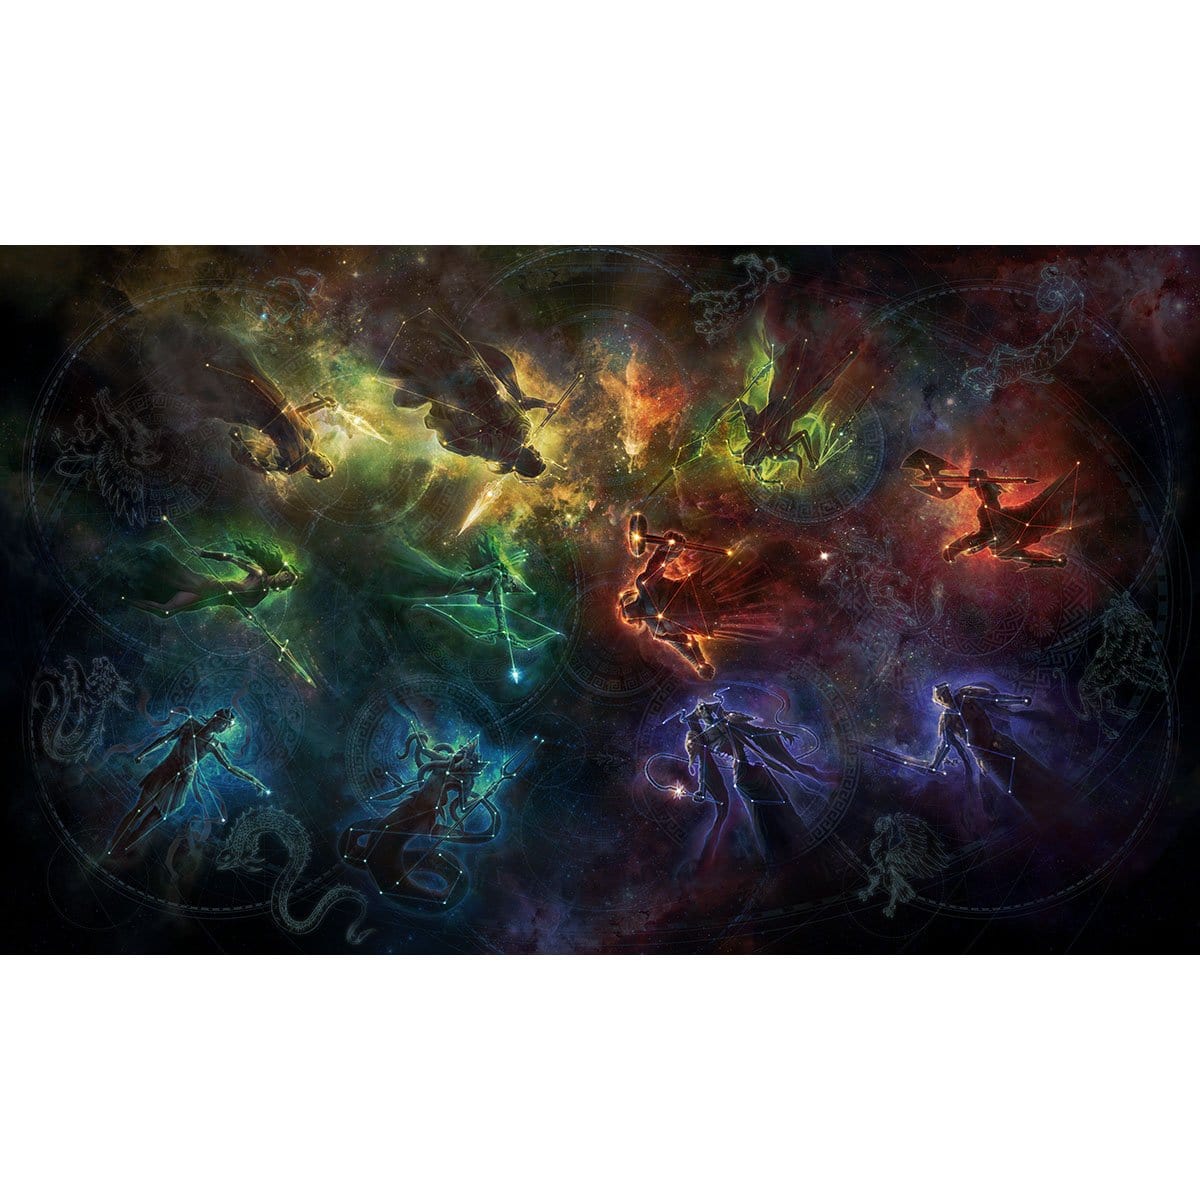 Theros Beyond Death Gods & Demigods Constellation Print - Print - Original Magic Art - Accessories for Magic the Gathering and other card games